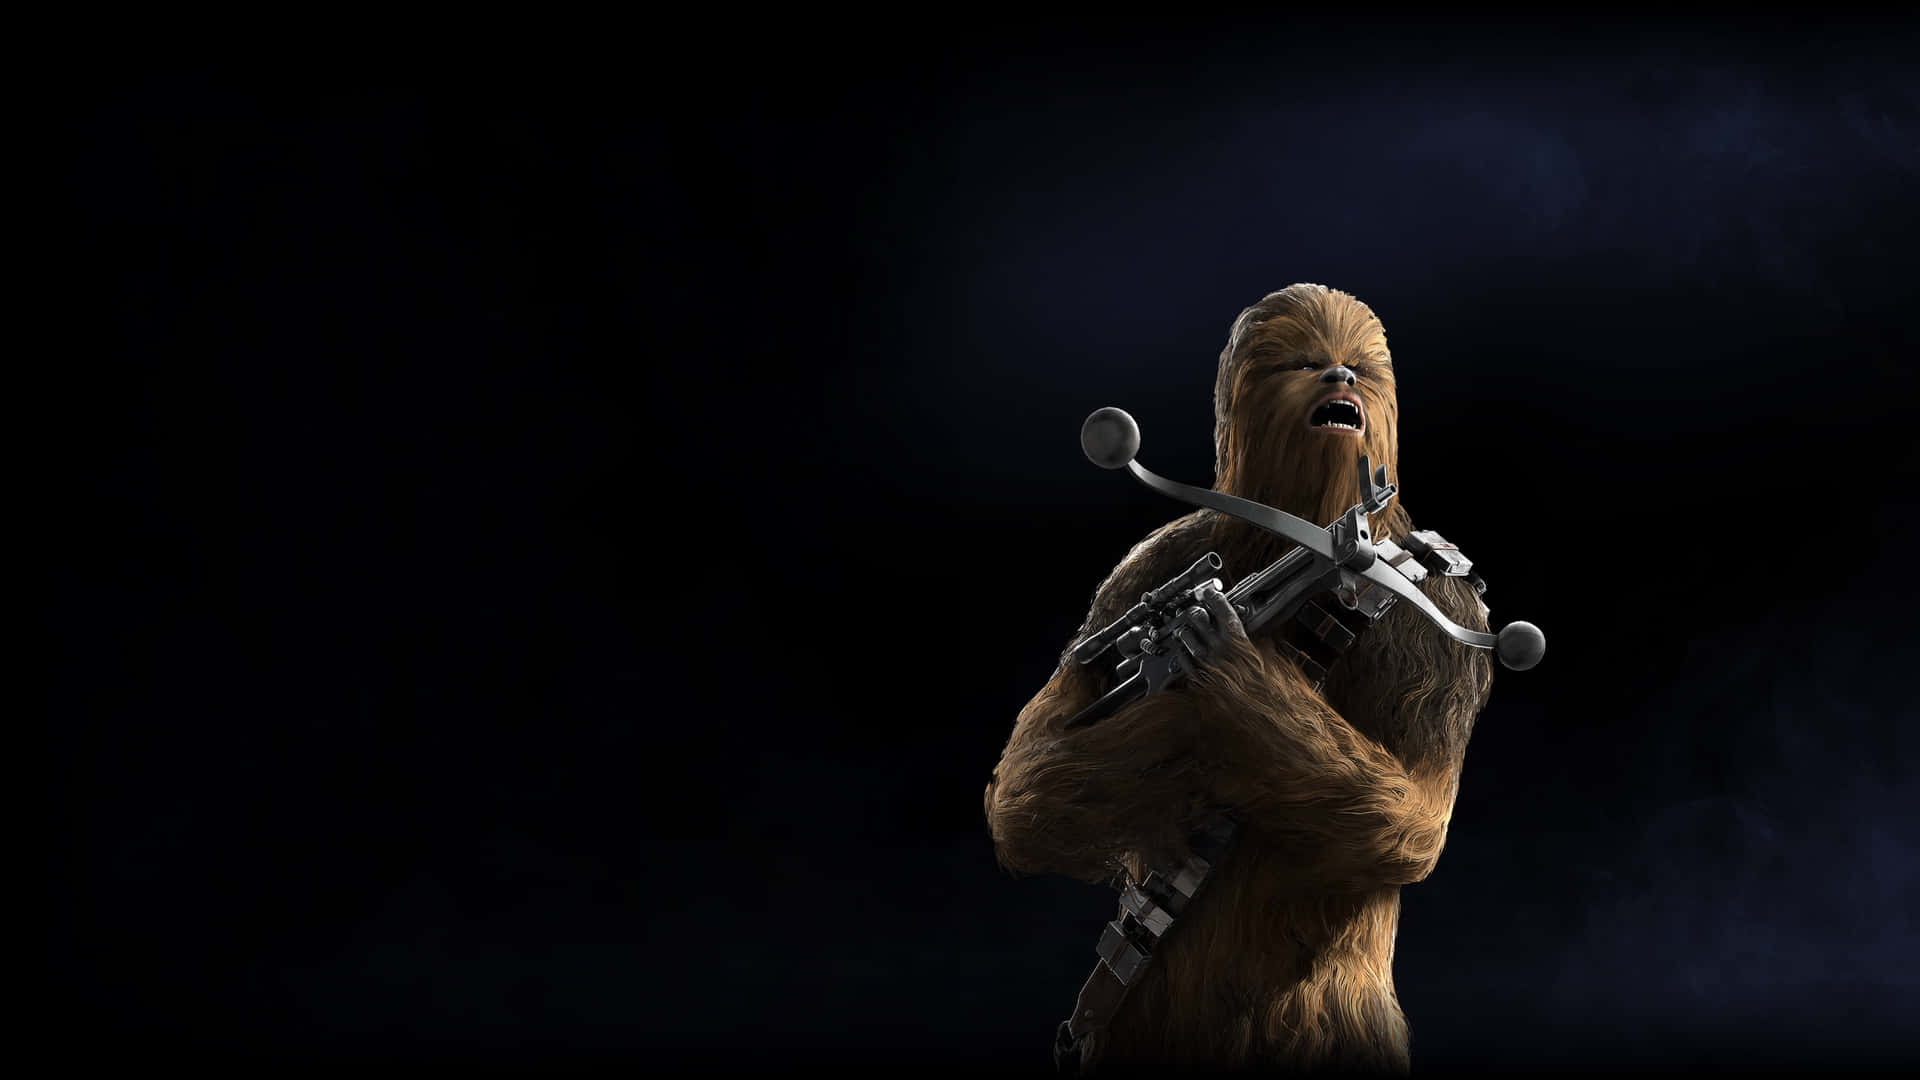 Show your loyalty to the Wookiee tribe with this epic wallpaper Wallpaper